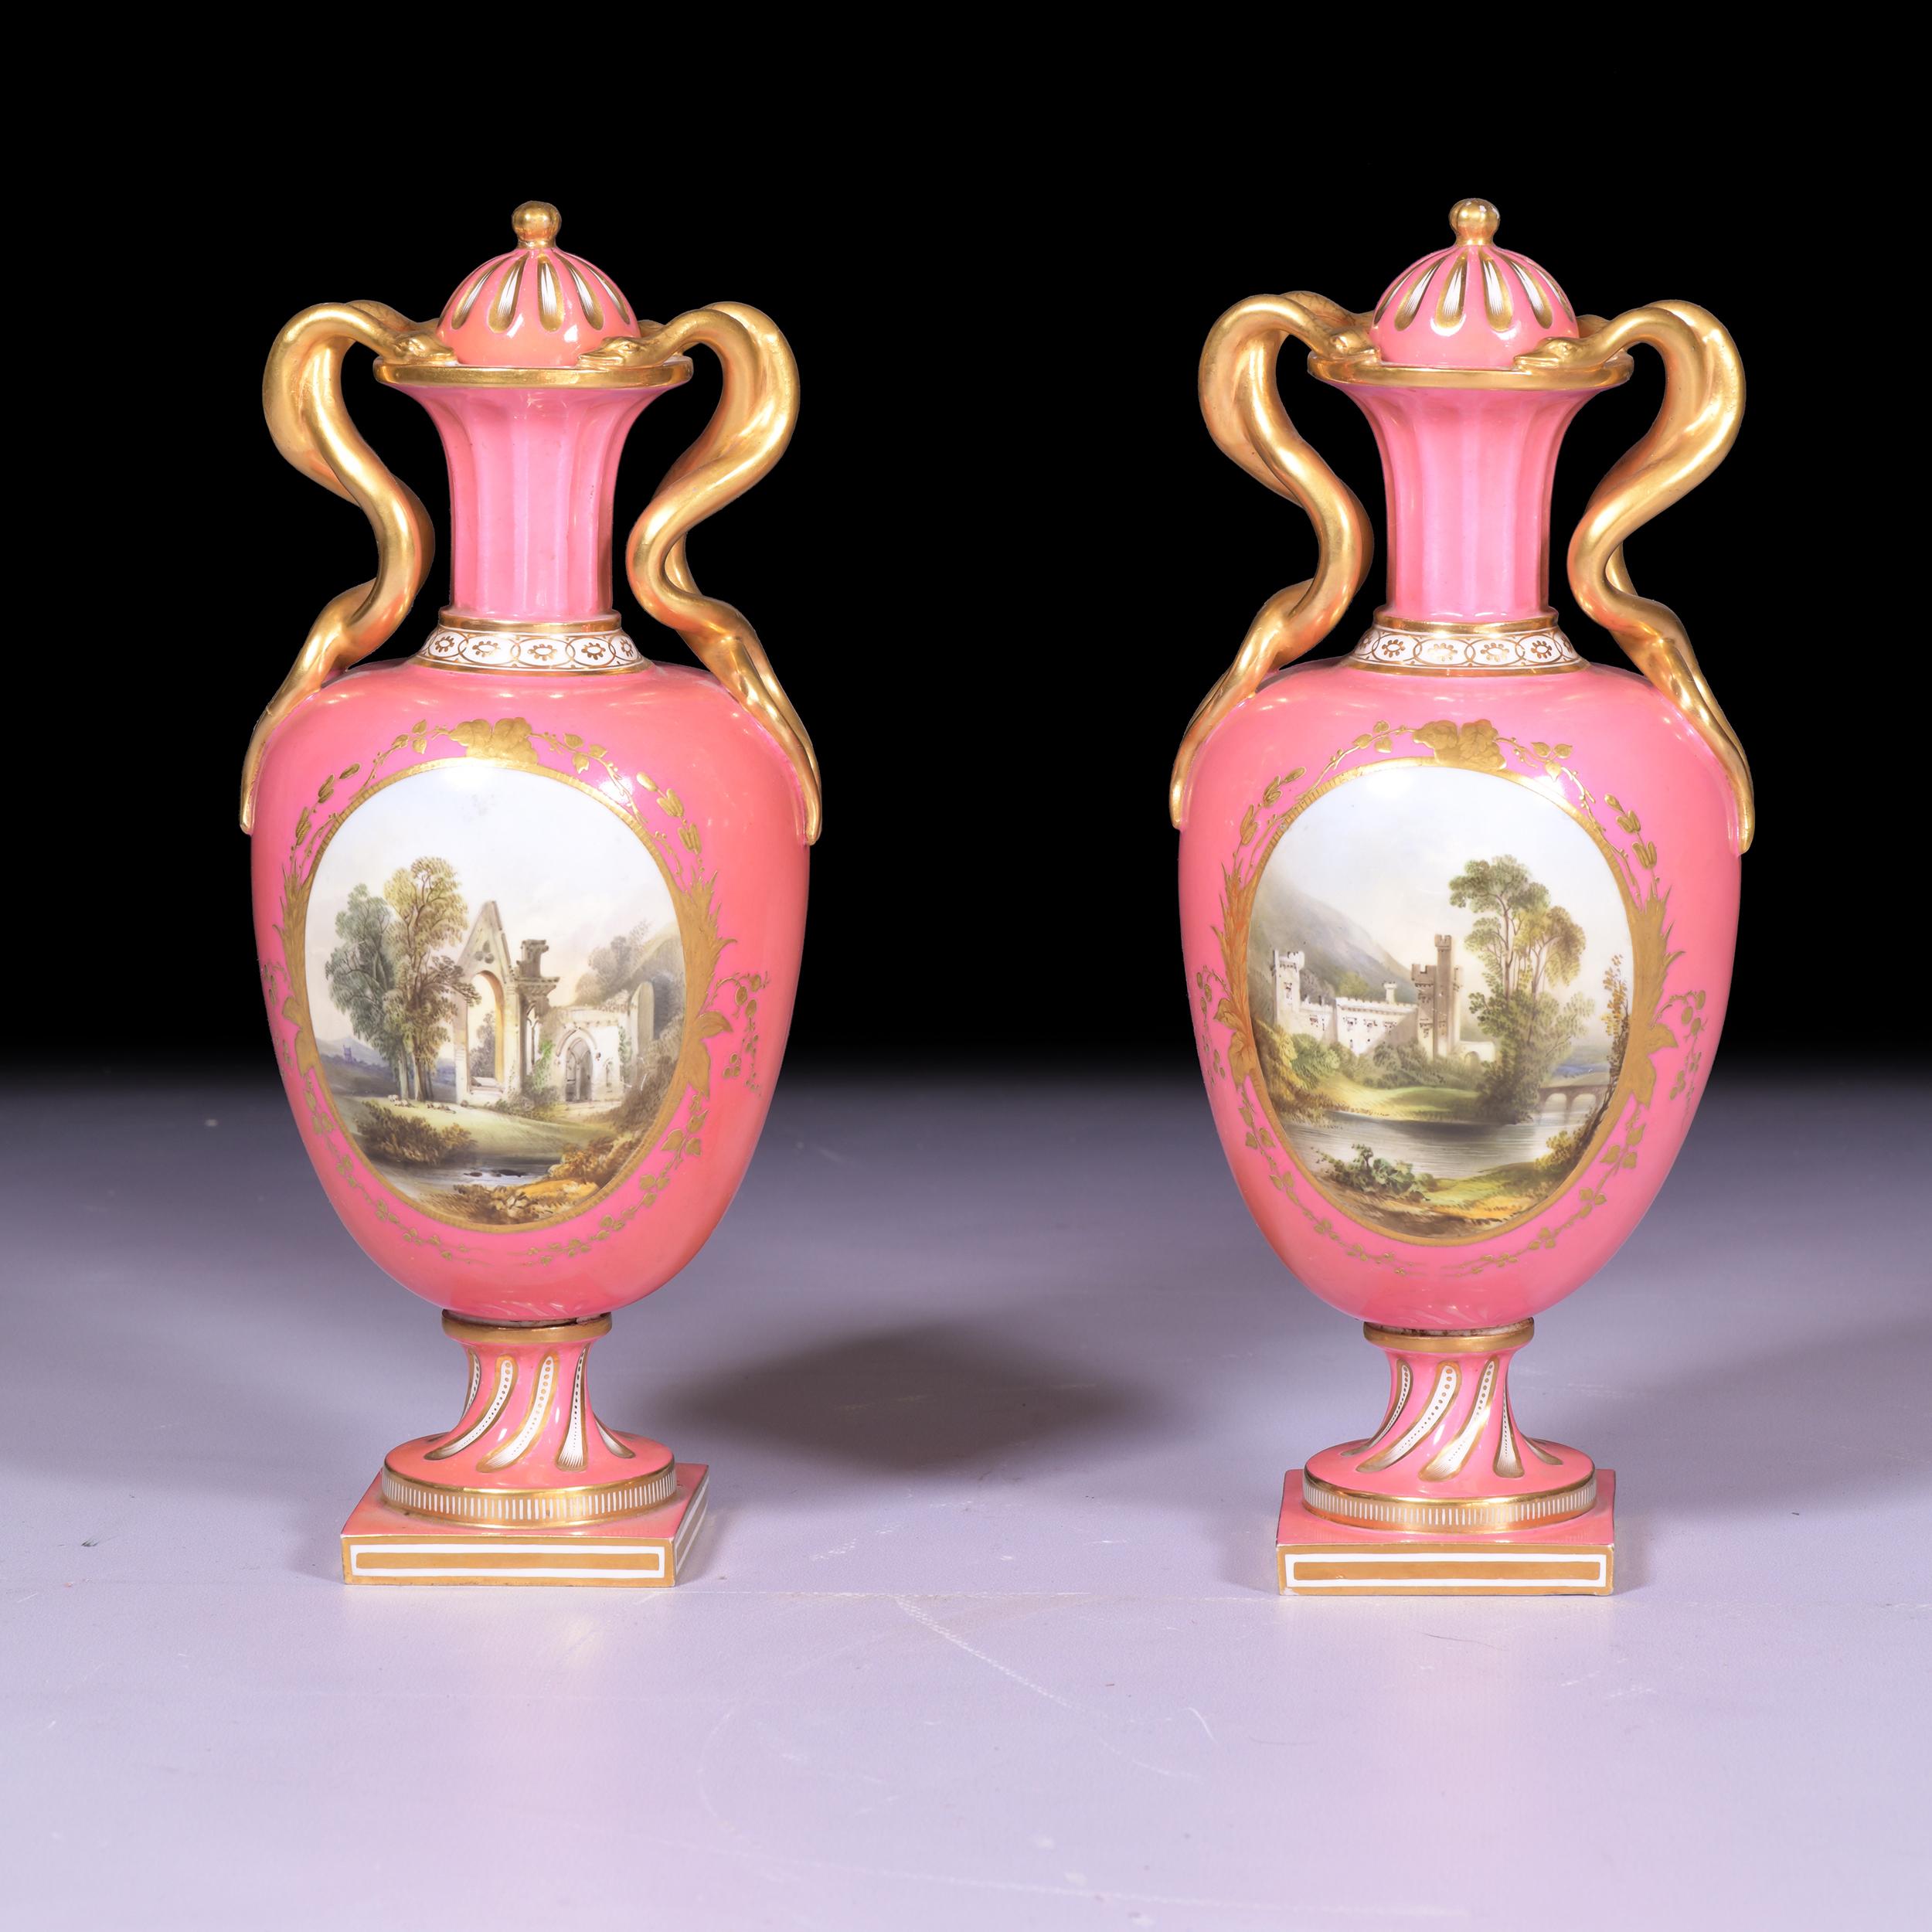 A pair of Coalport vases and covers, circa 1860, with ovoid bodies, gilded entwined serpent handles and fluted necks and feet, painted on both sides with oval landscapes of ruinous churches, a castle and a lakeland scene, reserved on bright pink